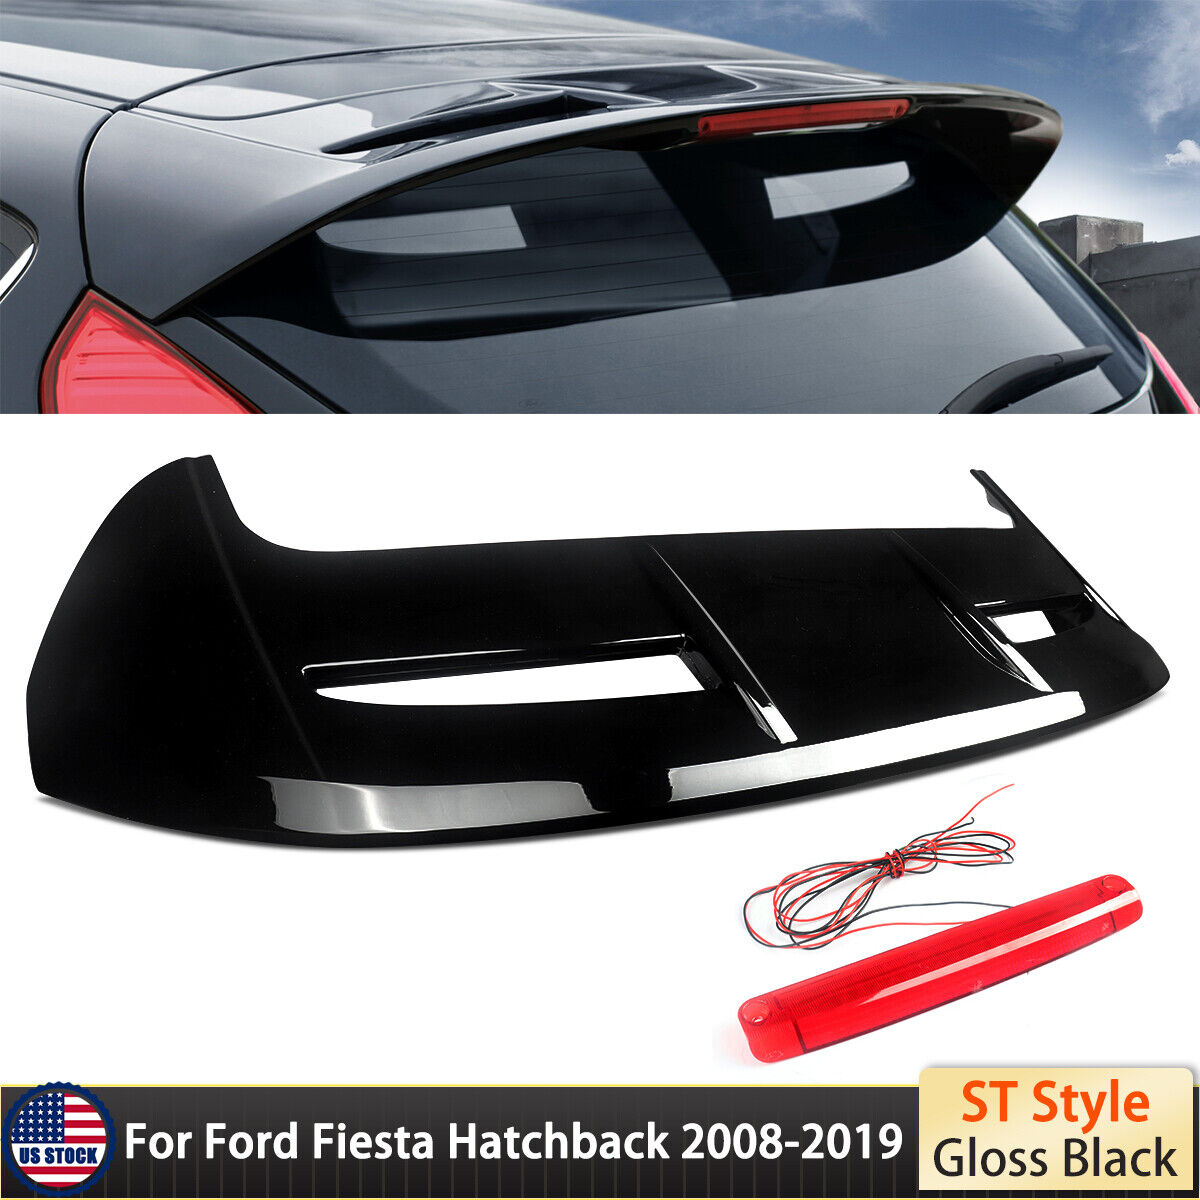 For 2008-2019 Ford Fiesta Hatchback ST Factory Style Spoiler Wing GLOSS BLACK